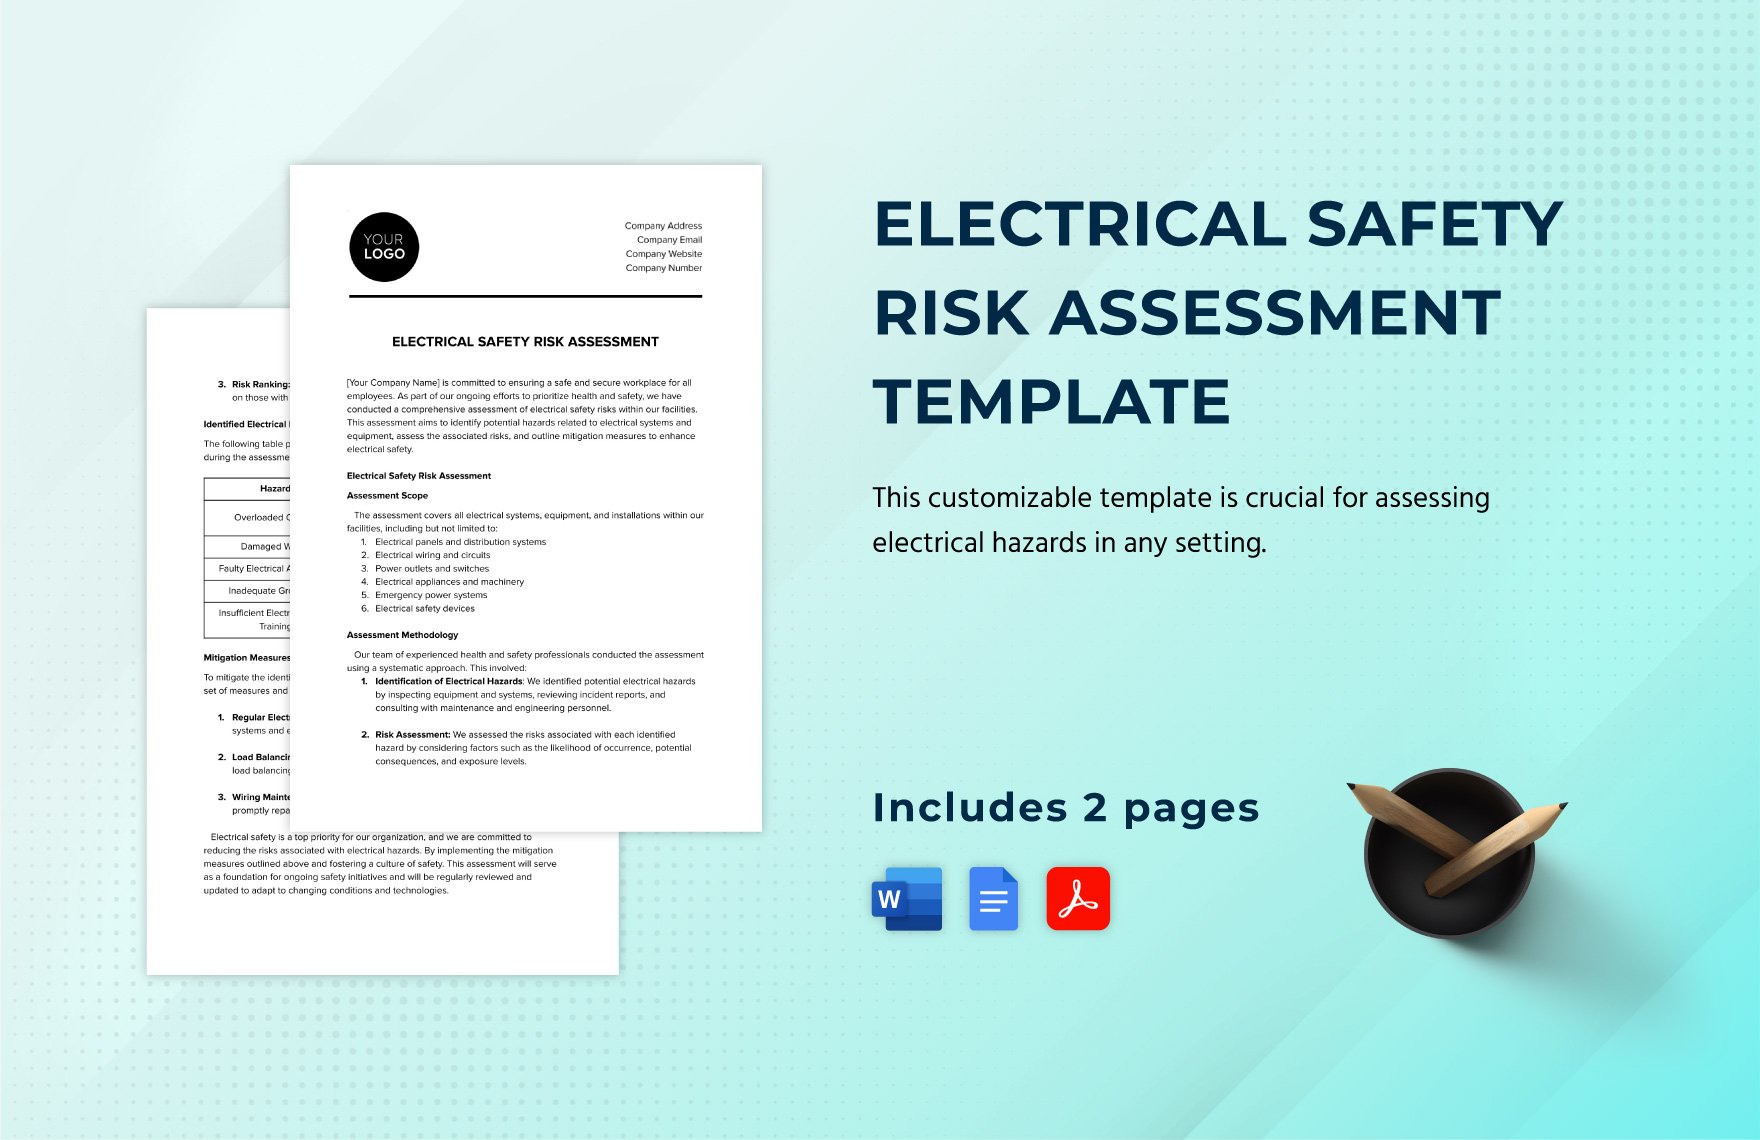 Electrical Safety Risk Assessment Template in Word, Google Docs, PDF